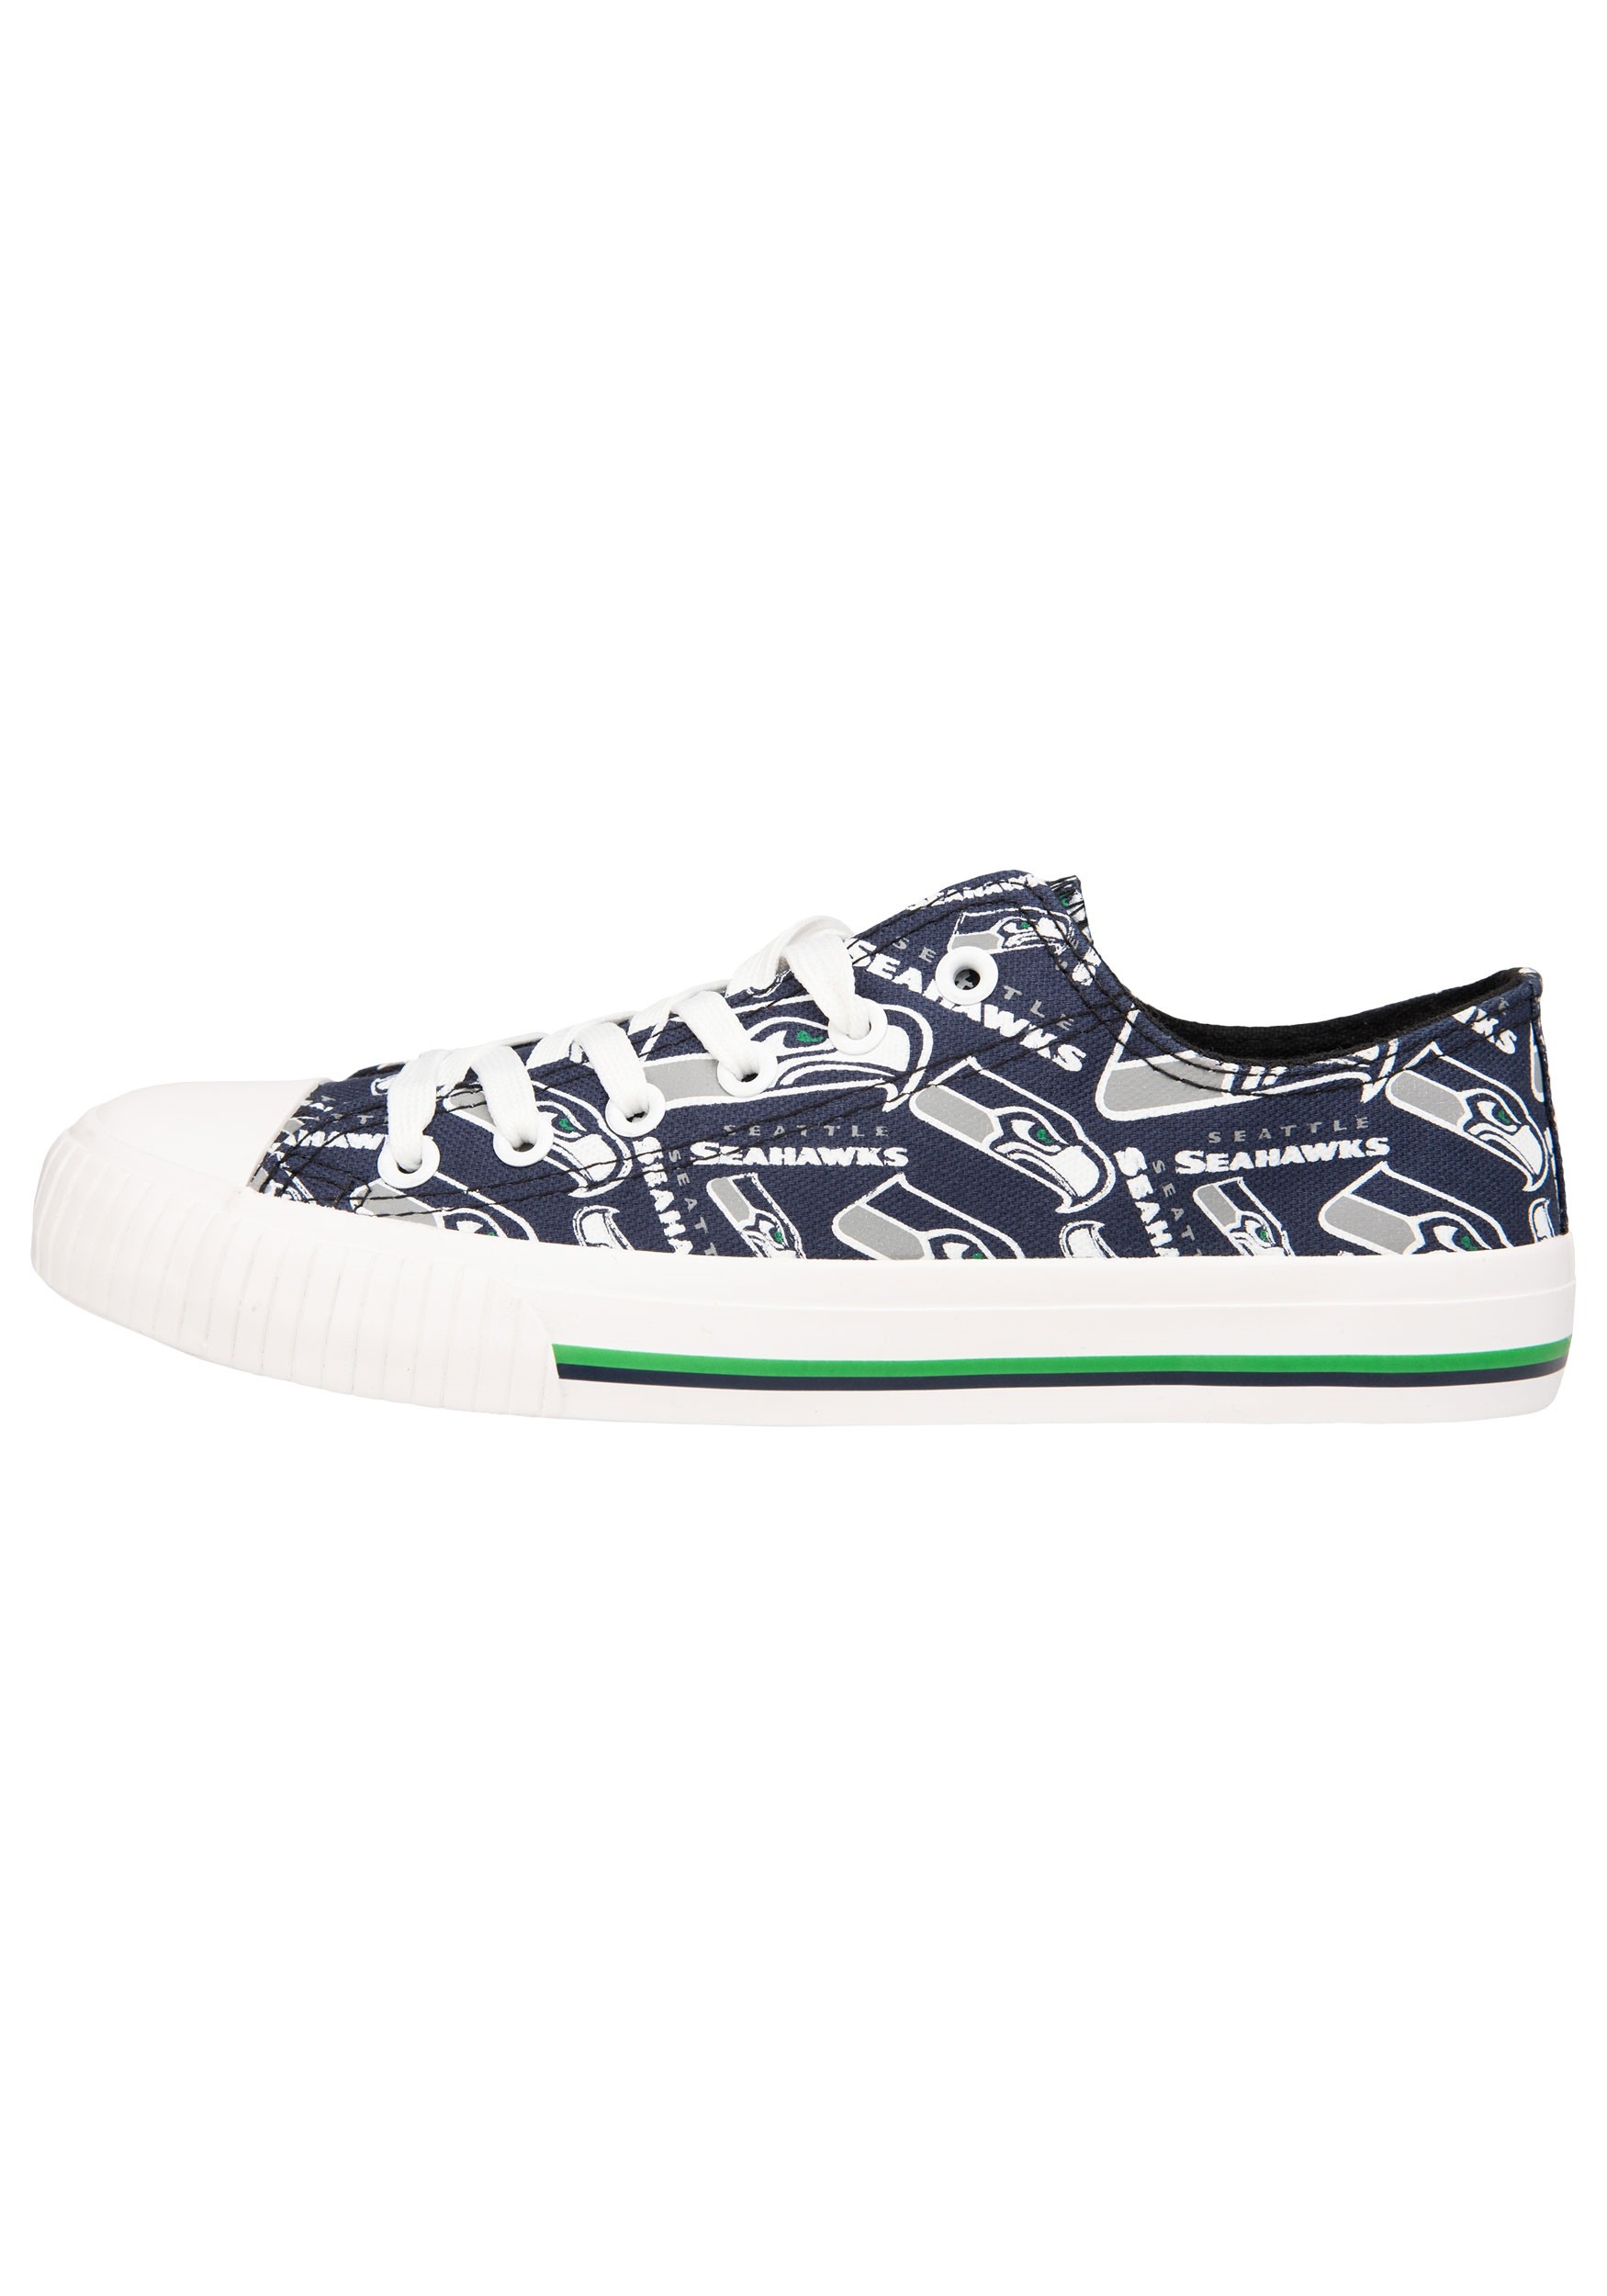 Seattle Seahawks Low Top Canvas Shoes for Women